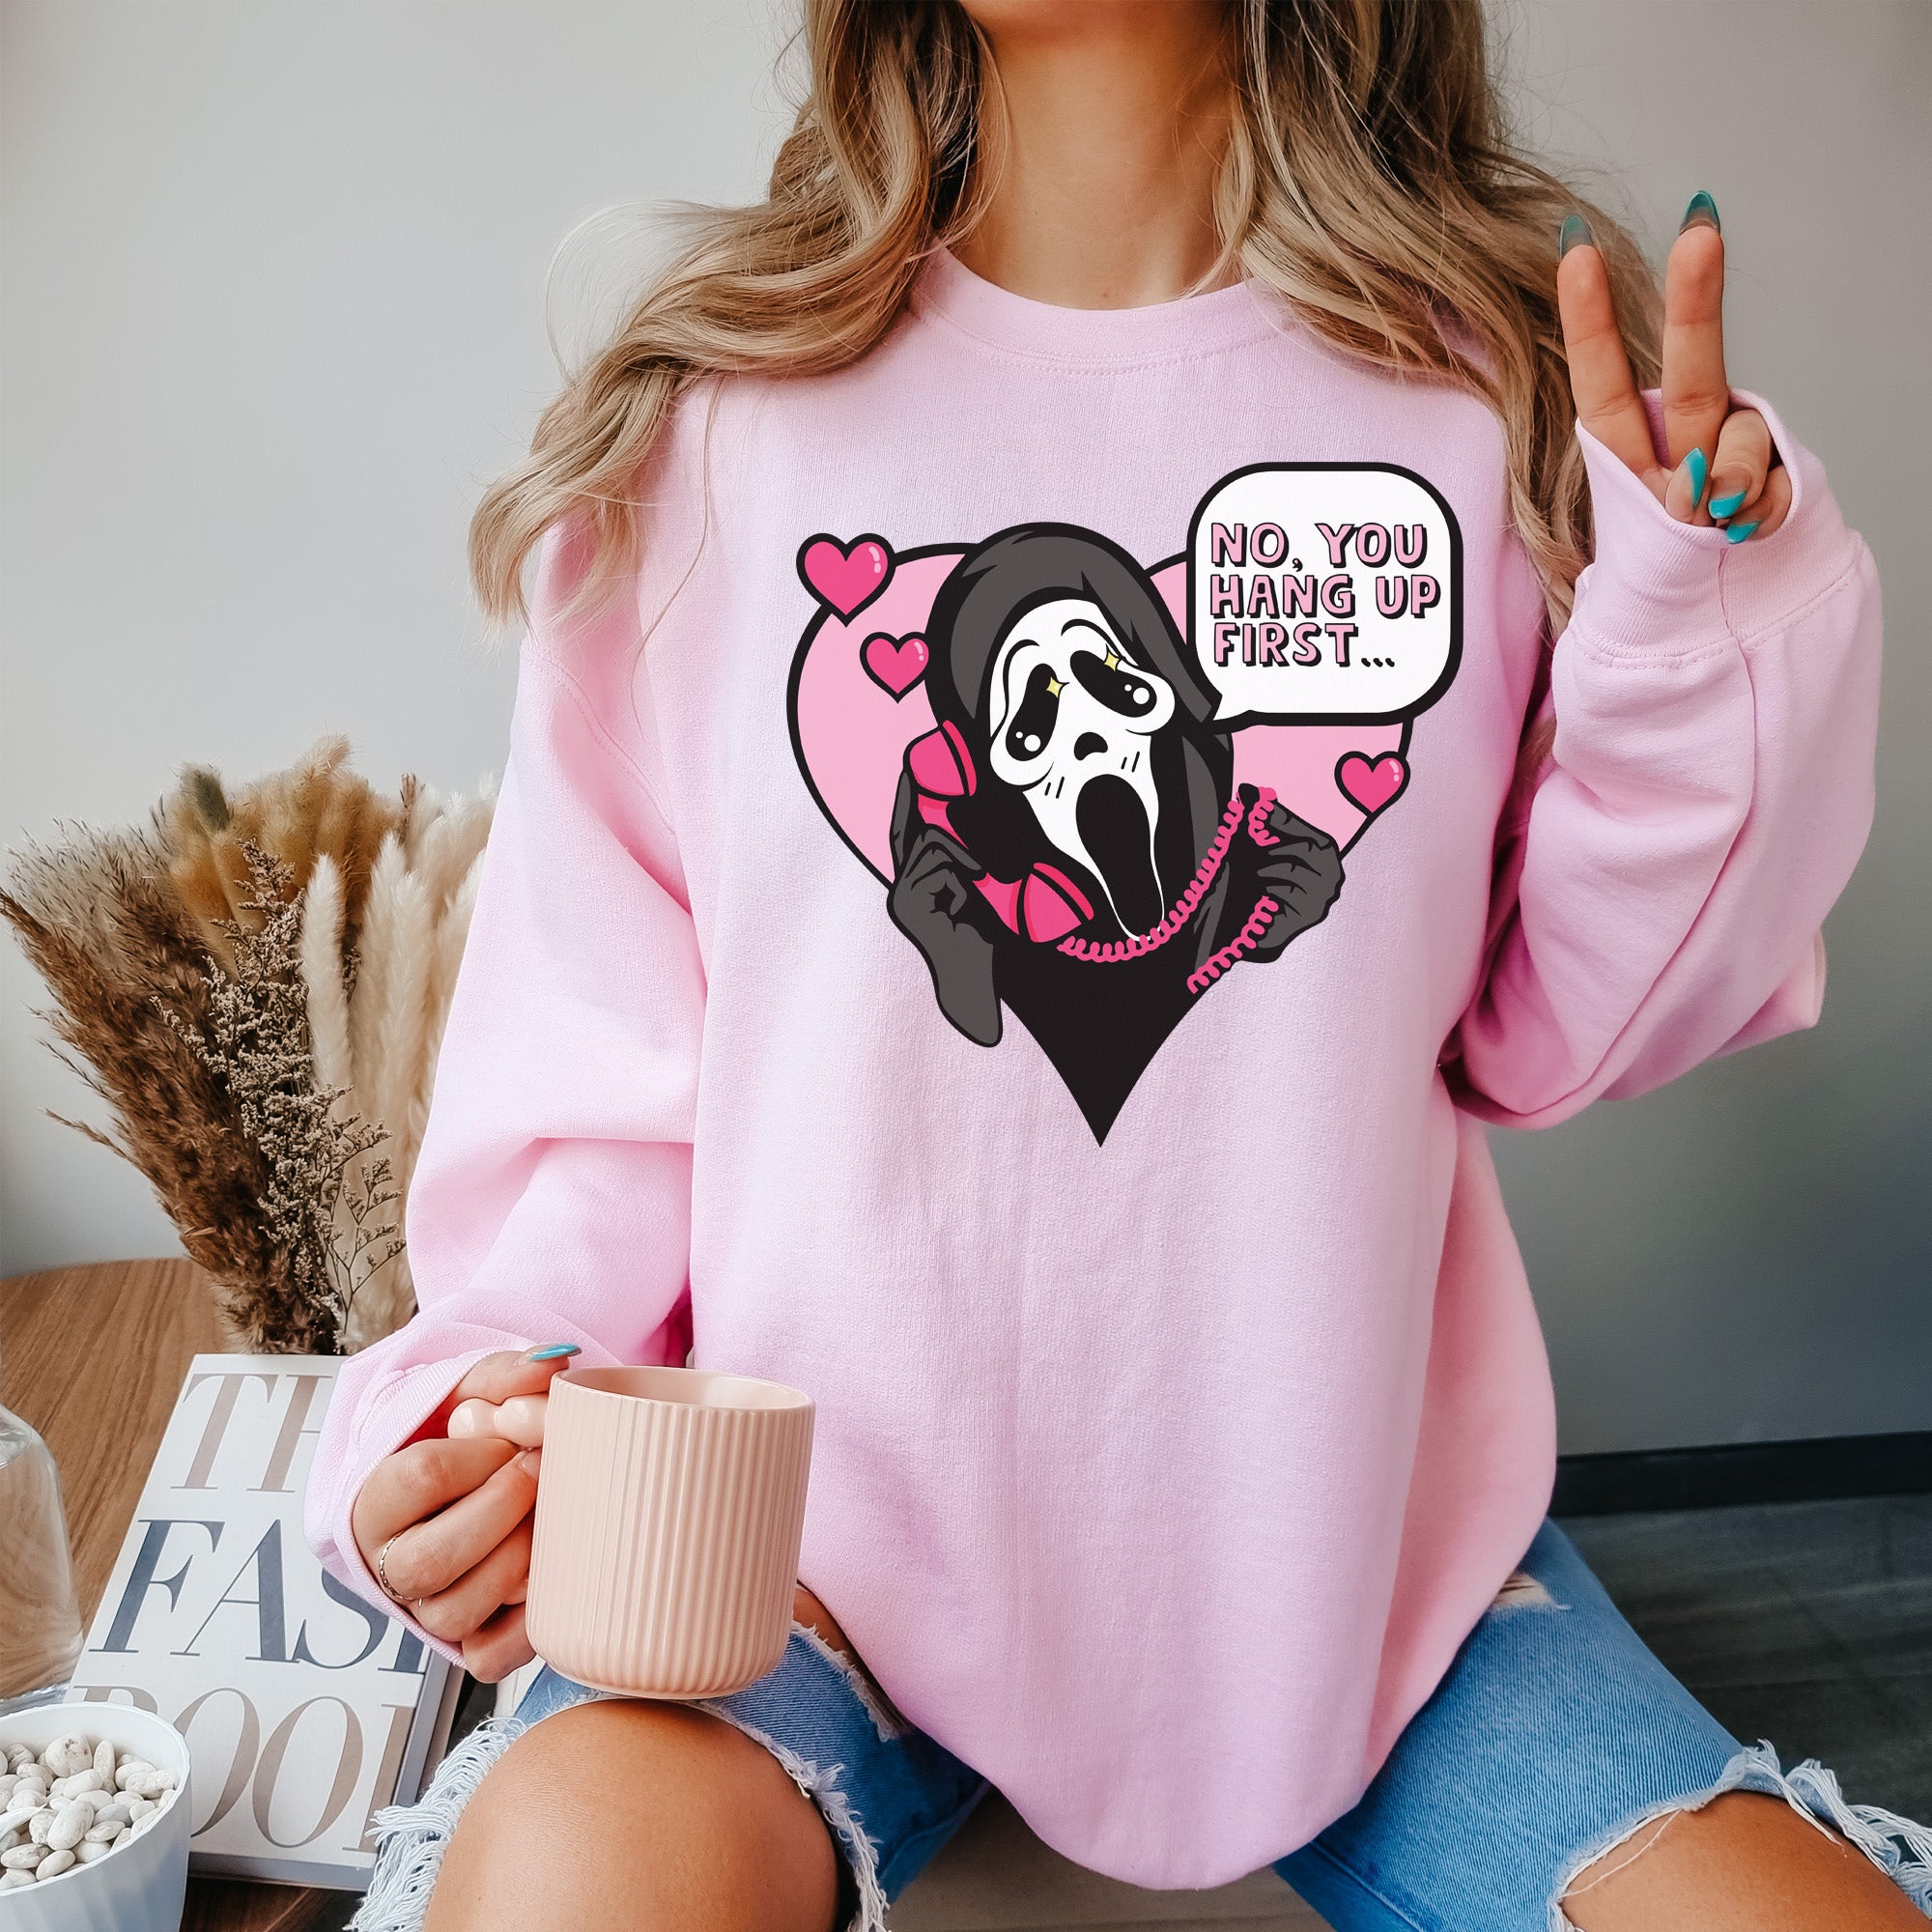 For all of the Ghost Face lovers, and Scream movie watchers. This halloween sweatshirt is perfect for you. allSKUs